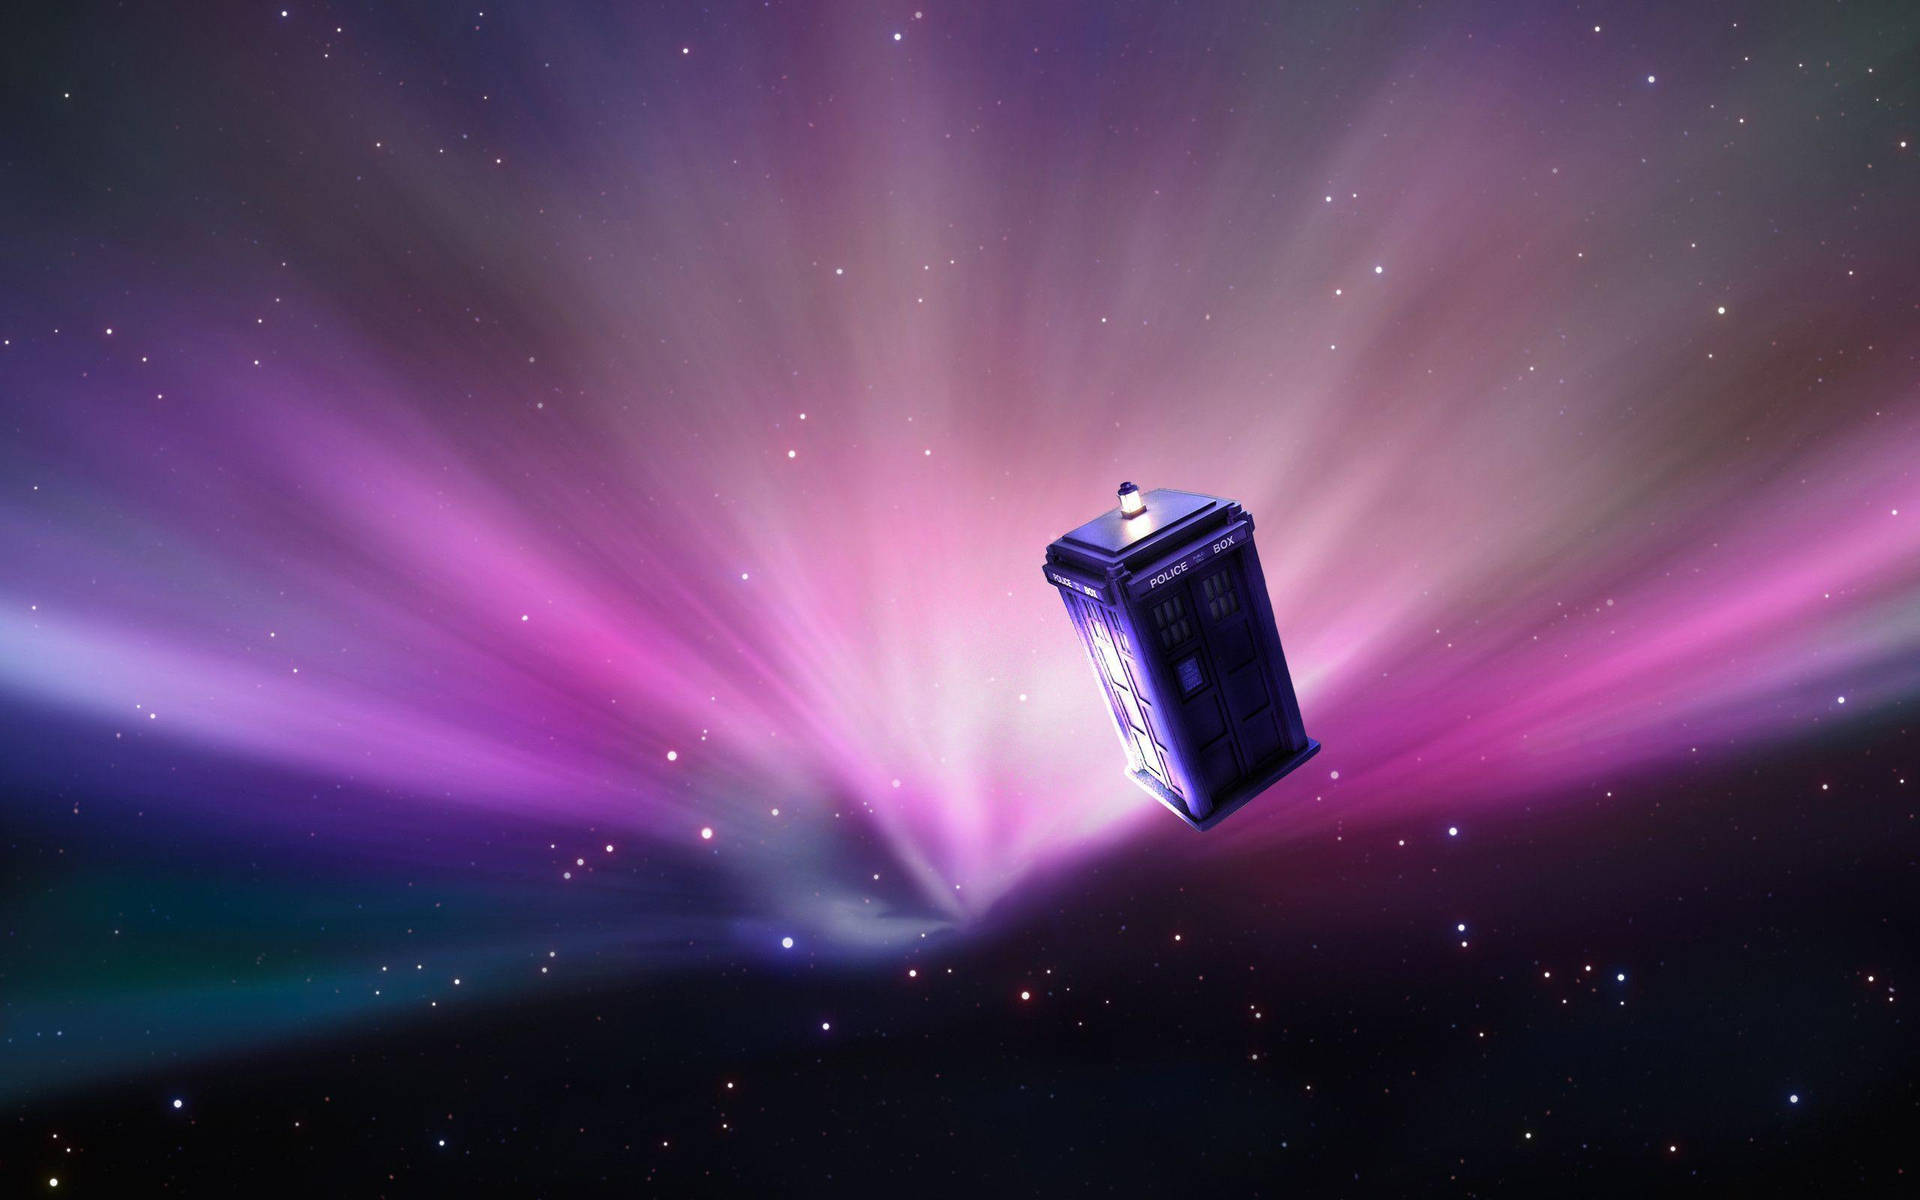 Doctor Who's Iconic Tardis Flying Through Space